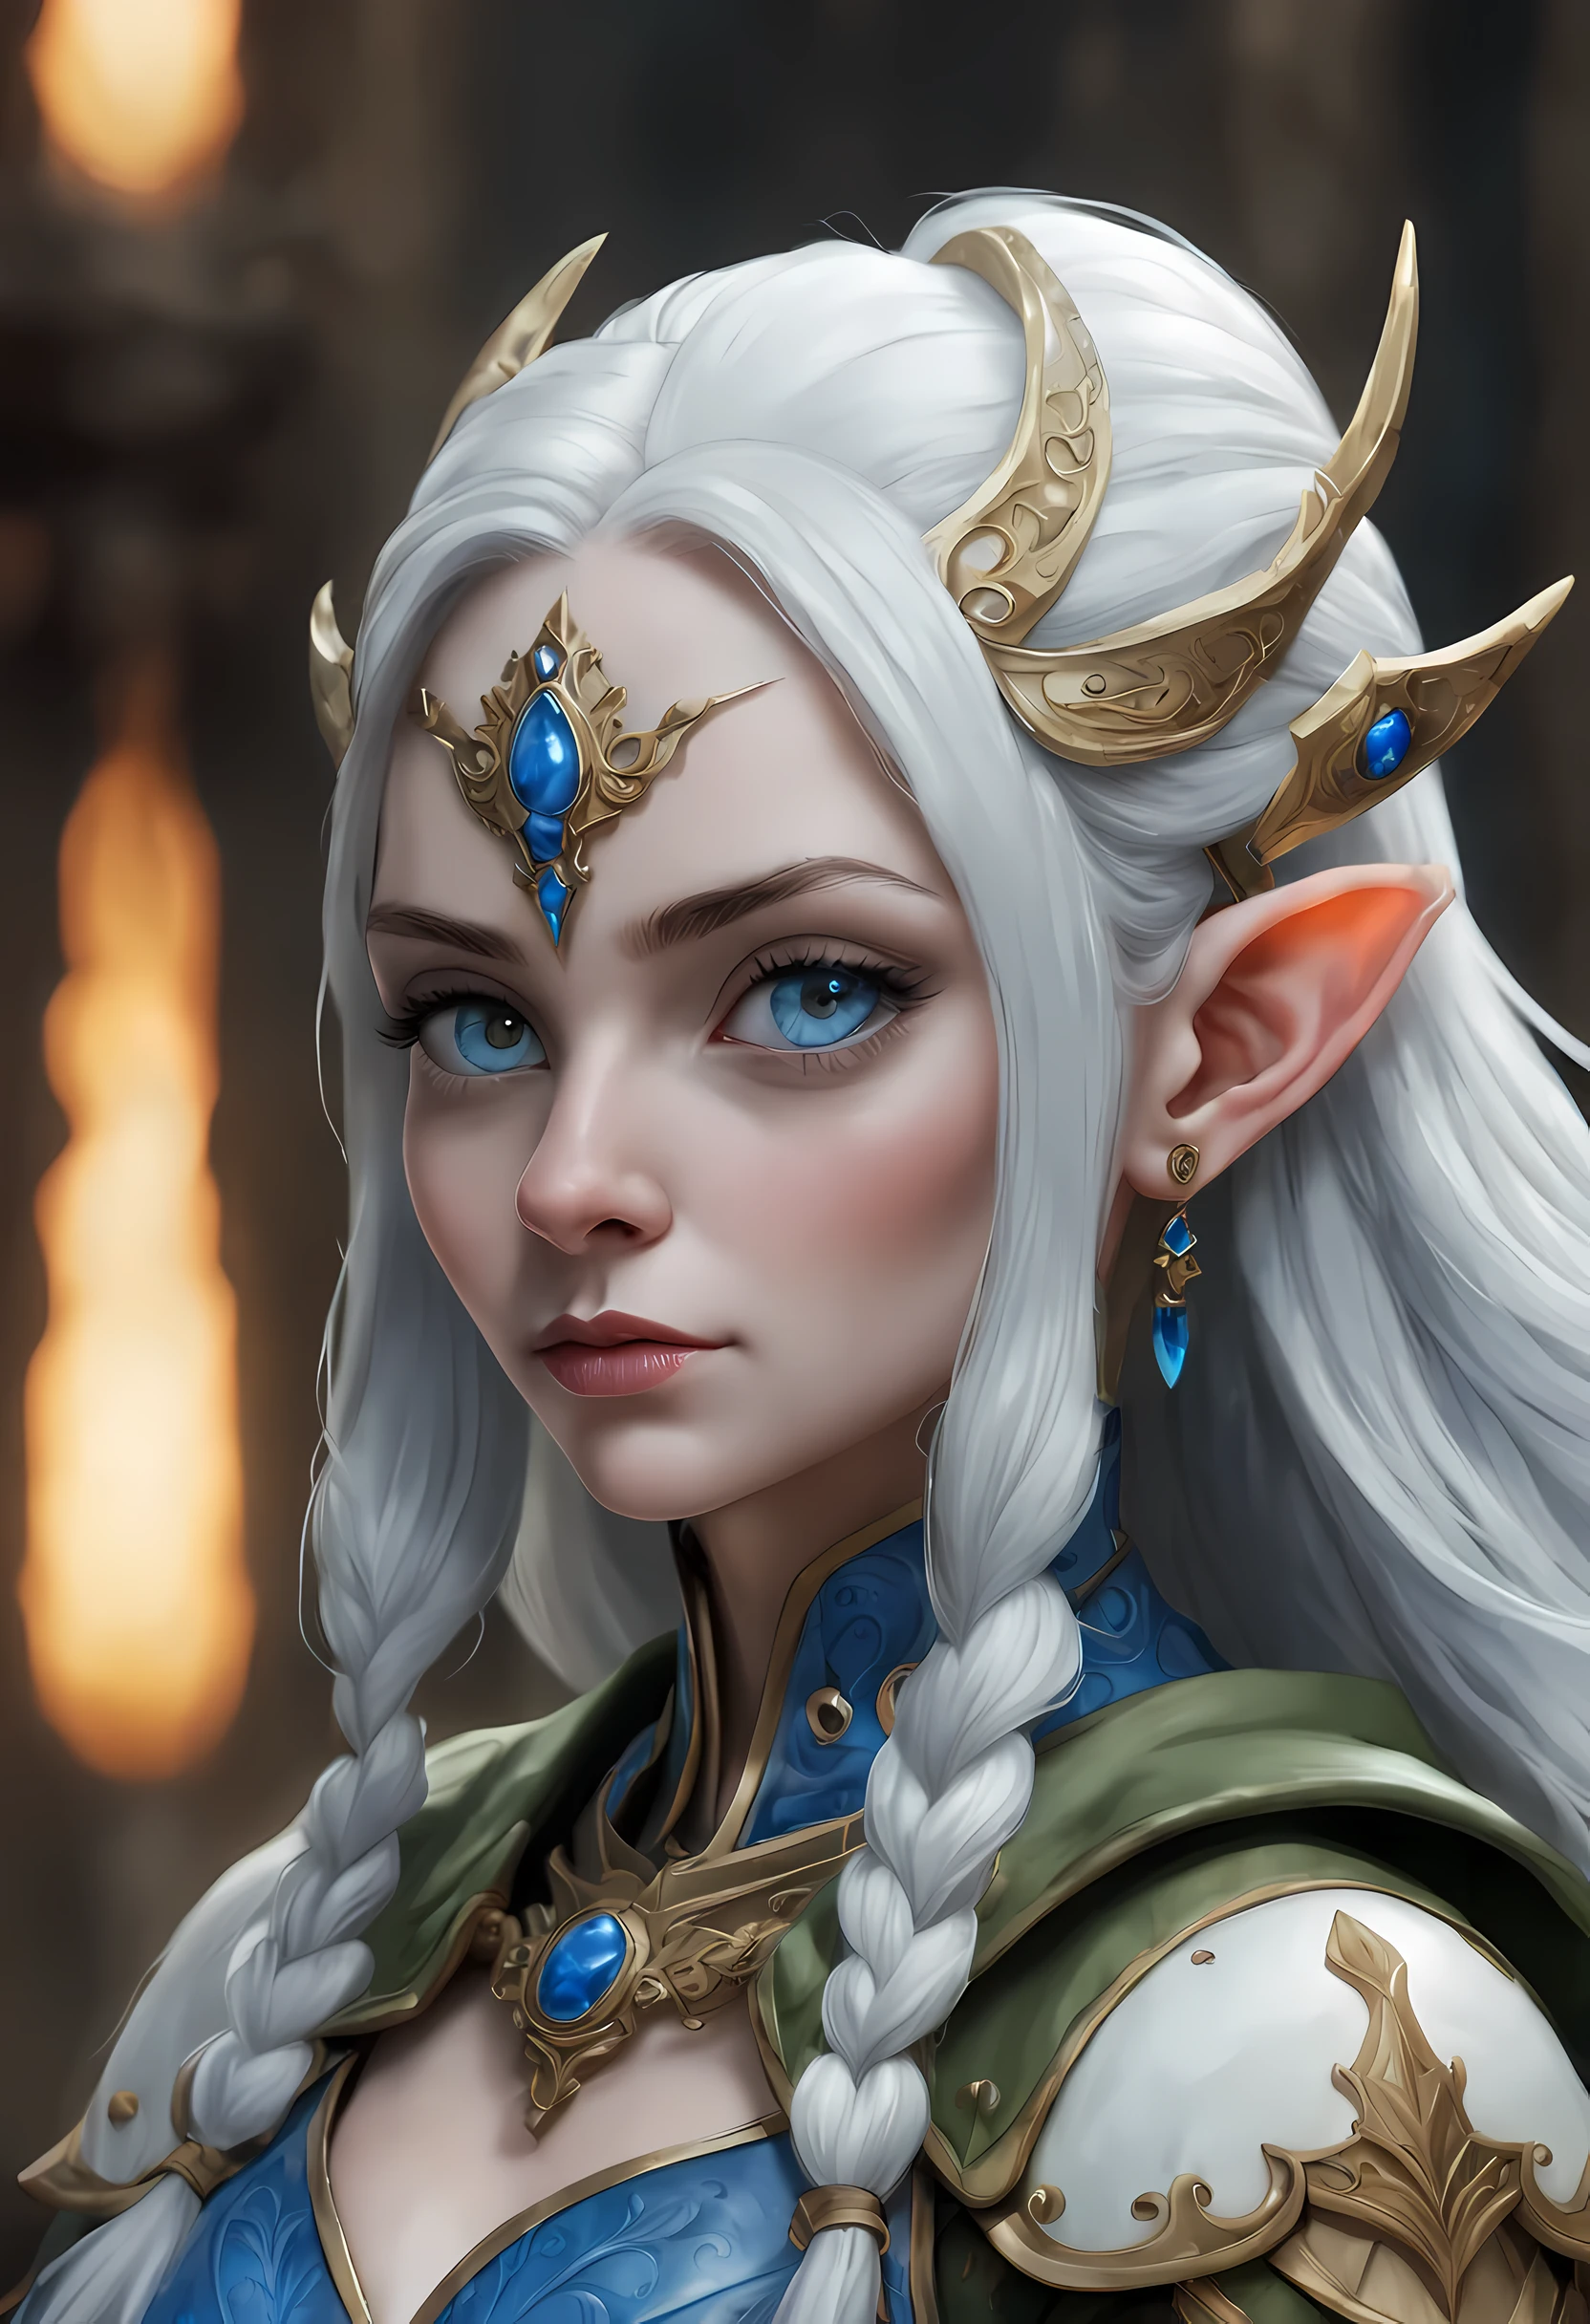 fantasy art, dnd art, RPG art, wide shot, (masterpiece: 1.4) a (portrait: 1.3) intense details, highly detailed, photorealistic, best quality, highres, portrait a female (fantasy art, Masterpiece, best quality: 1.3) ((blue skin: 1.5)), intense details facial details, exquisite beauty, (fantasy art, Masterpiece, best quality) cleric, (blue: 1.3) skinned female, (white hair: 1.3), long hair, intense (green: 1.3) eye, fantasy art, Masterpiece, best quality) armed a fiery sword red fire, wearing heavy (white: 1.3) half plate mail armor, wearing high heeled laced boots, wearing an(orange :1.3) cloak, wearing glowing holy symbol GlowingRunes_yellow, within fantasy temple background, reflection light, high details, best quality, 16k, [ultra detailed], masterpiece, best quality, (extremely detailed), close up, ultra wide shot, photorealistic, RAW, fantasy art, dnd art, fantasy art, realistic art,((best quality)), ((masterpiece)), (detailed), perfect face, ((no ears: 1.6))